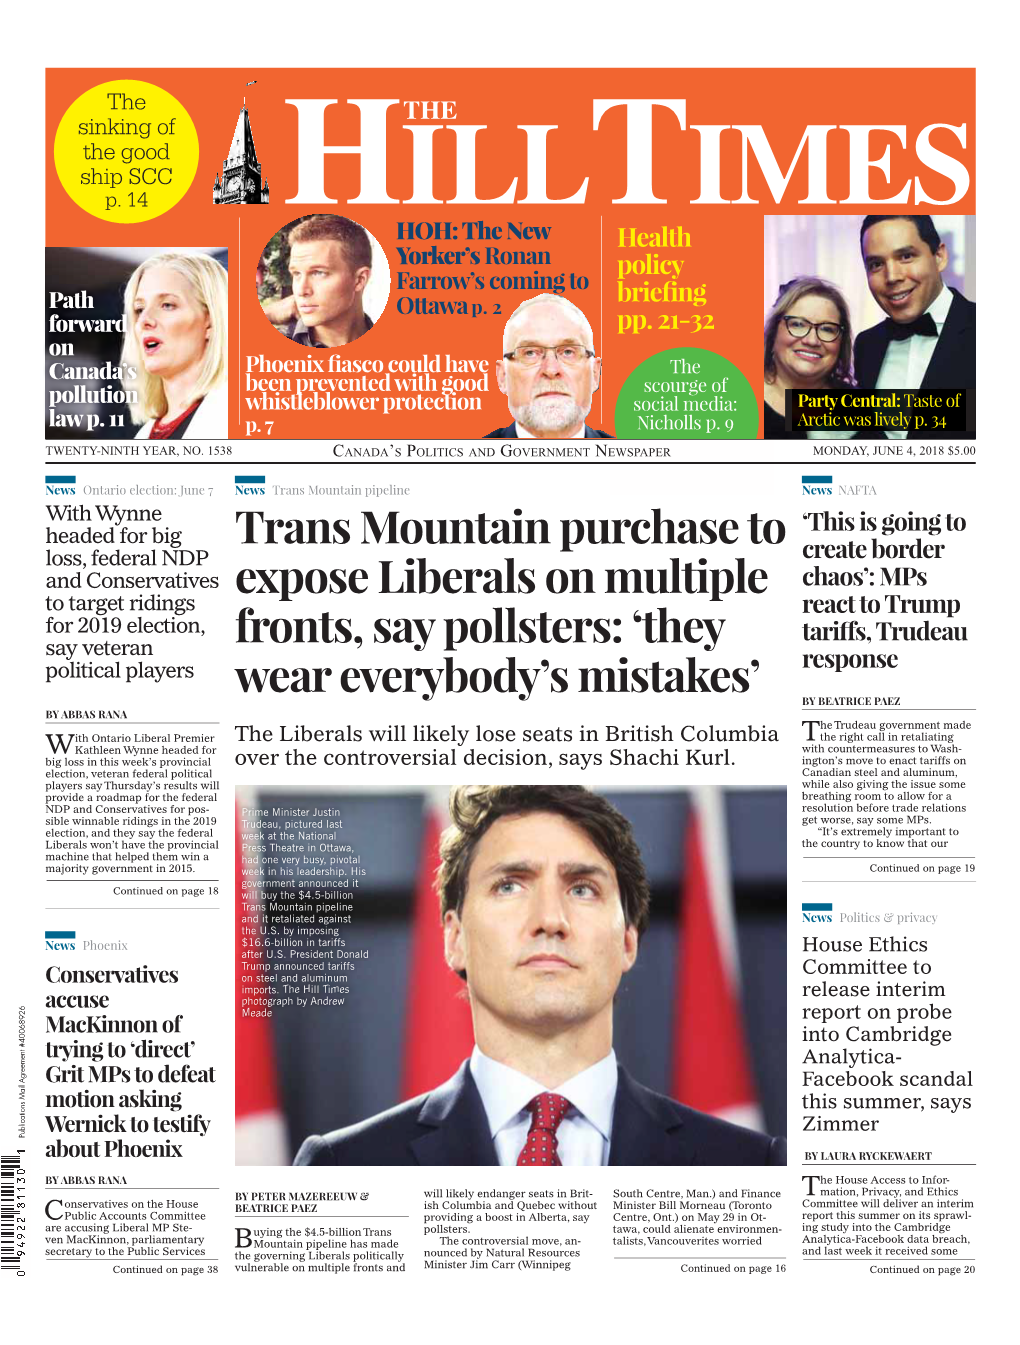 Trans Mountain Purchase to Expose Liberals on Multiple Fronts, Say Pollsters: ‘They Wear Everybody’S Mistakes’